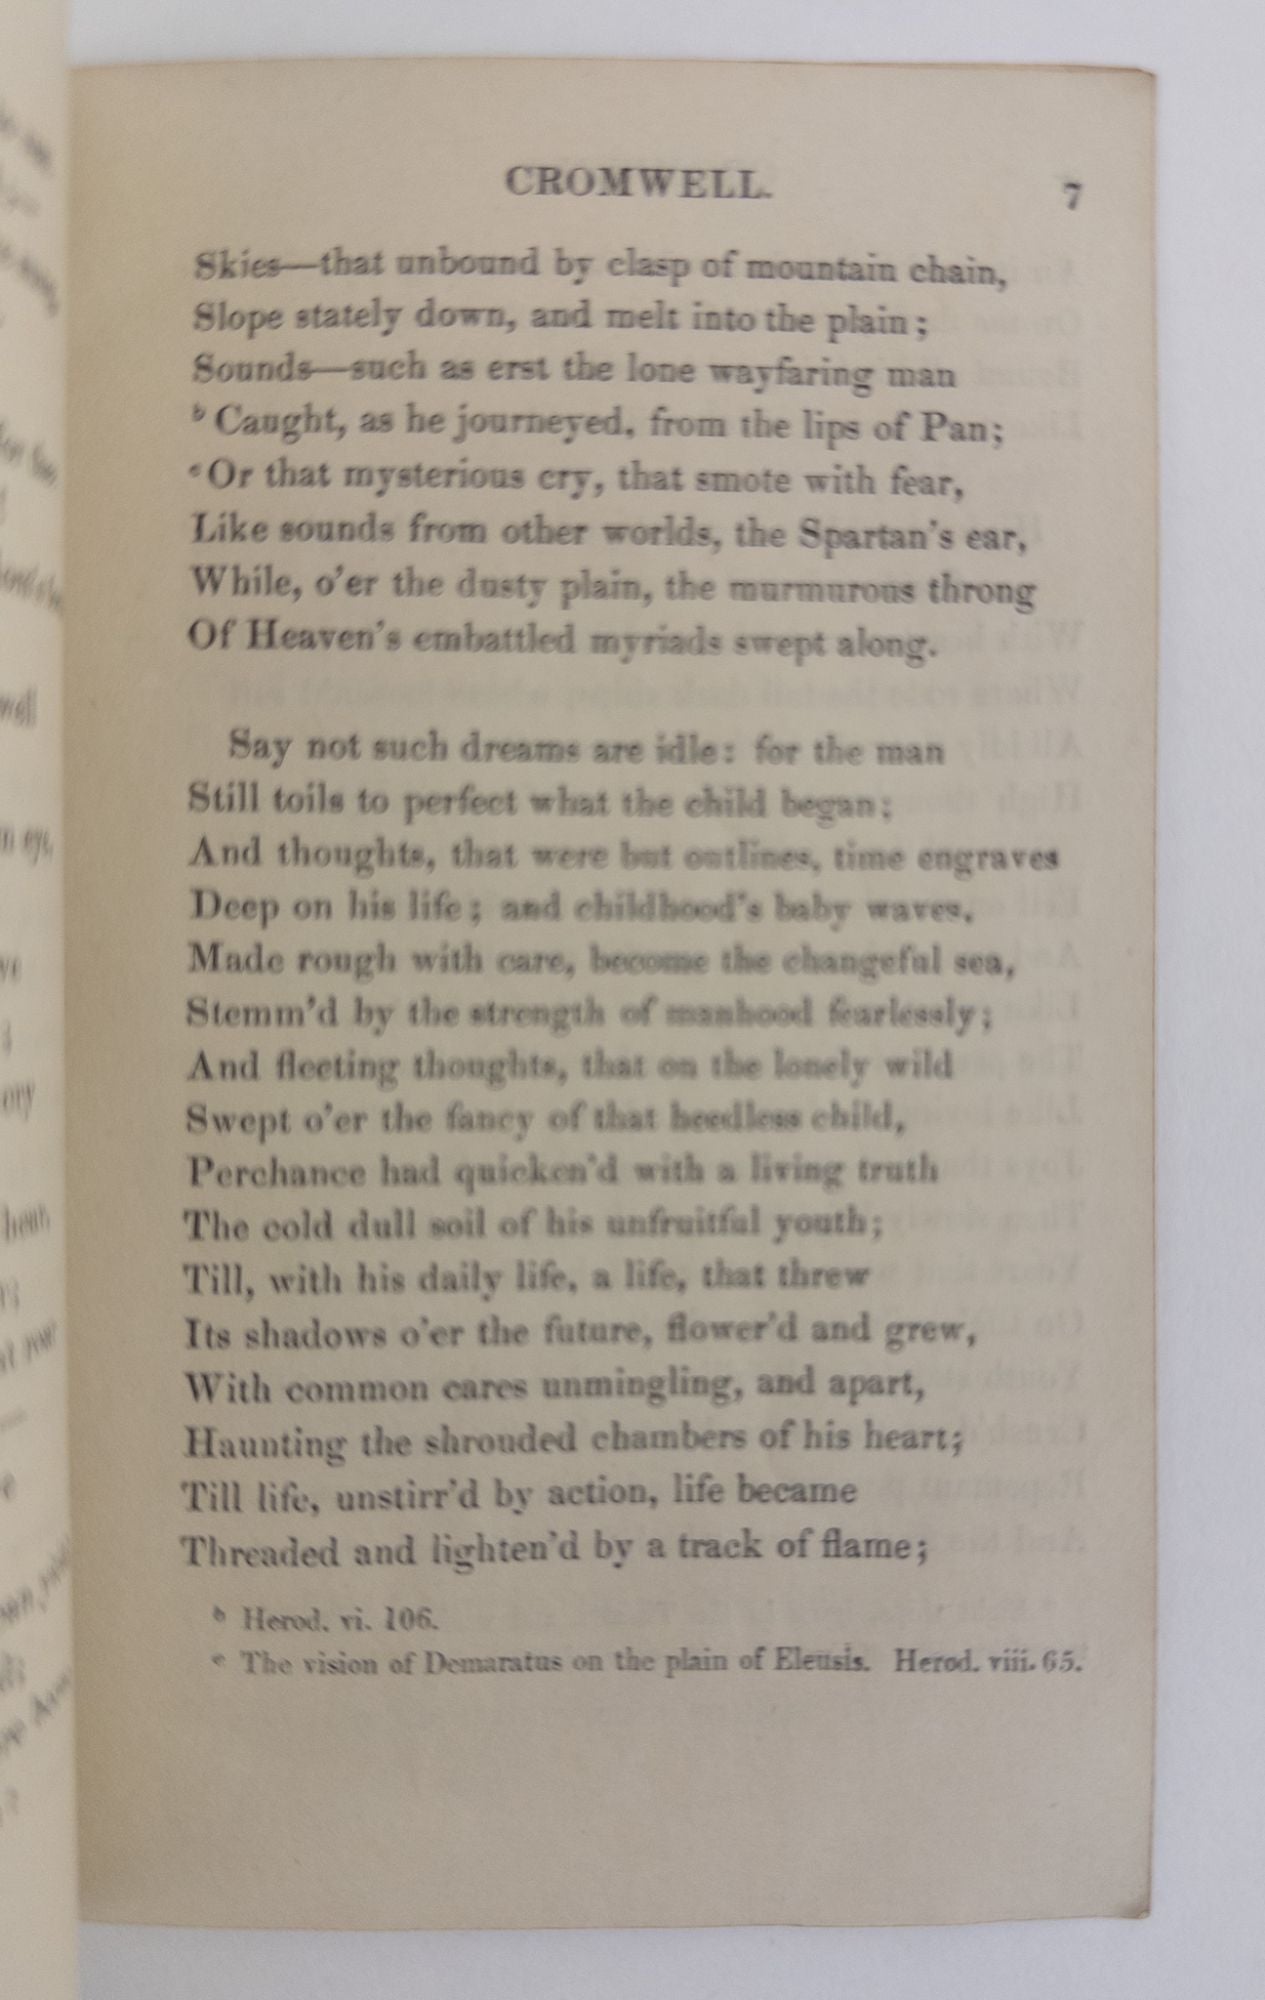 Product Image for CROMWELL: A PRIZE POEM, RECITED IN THE THEATRE, OXFORD; JUNE 28, 1843